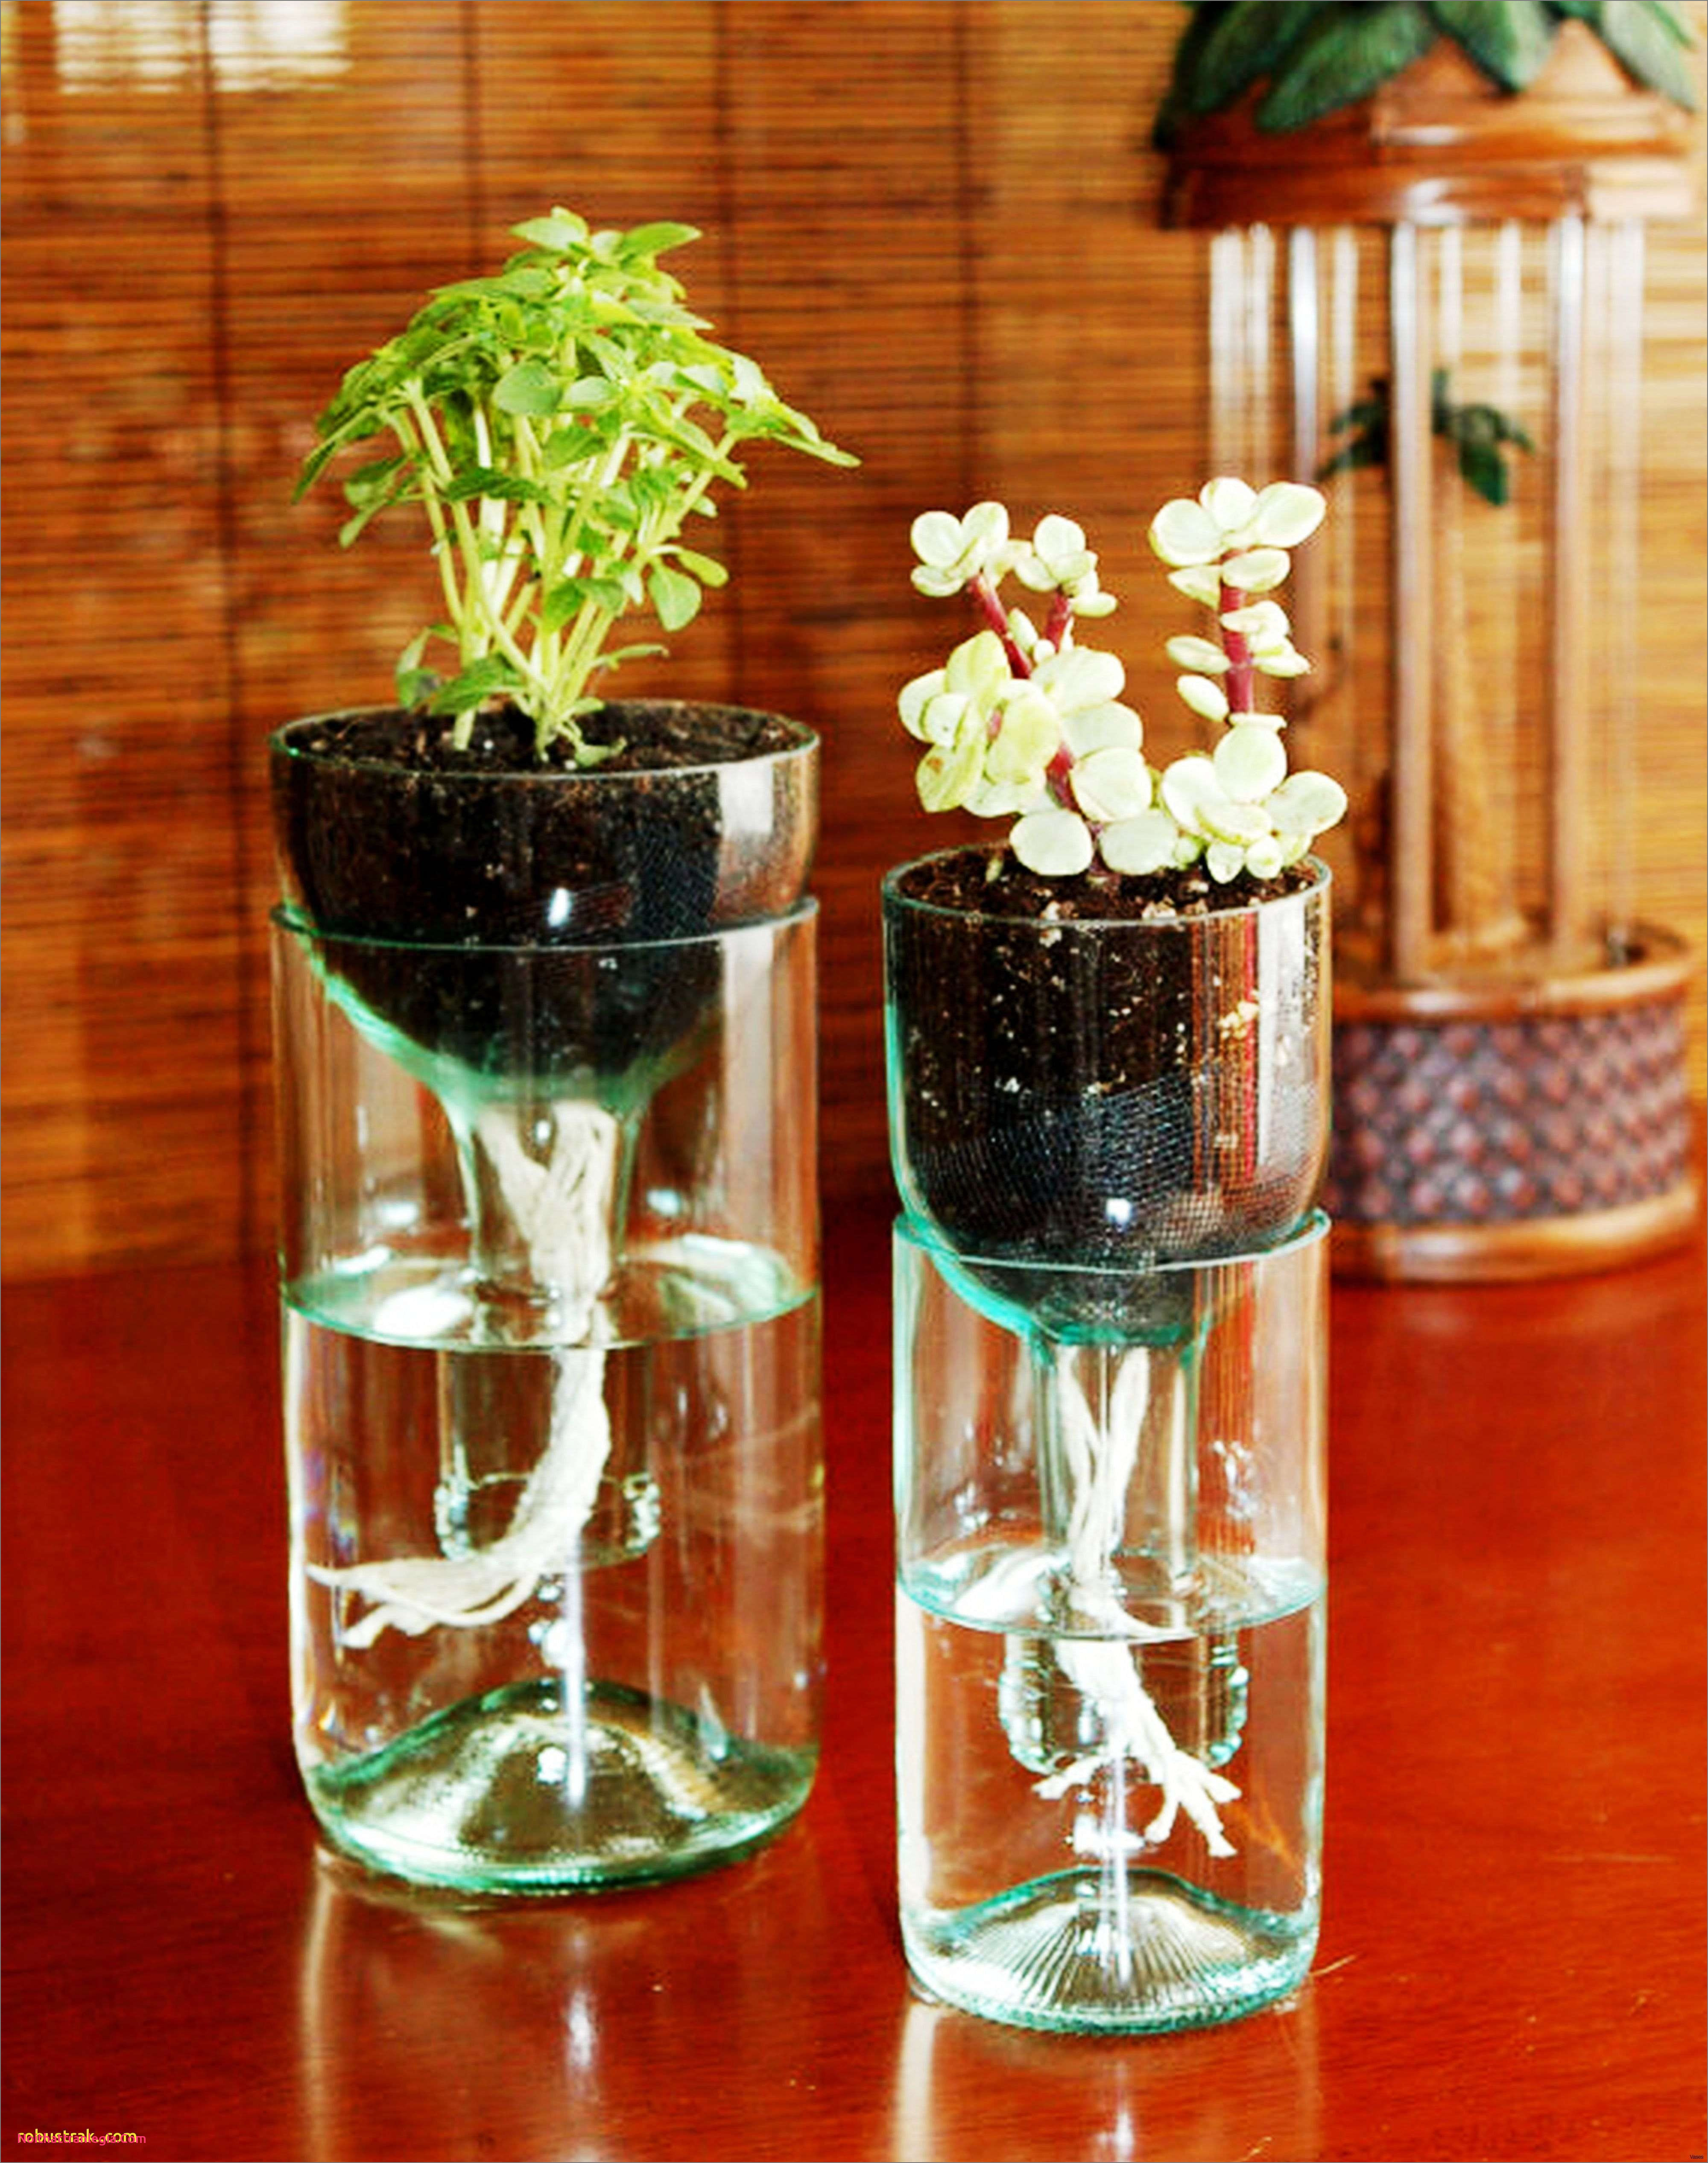 17 Perfect Glass Column Vase 2024 free download glass column vase of 20 how to make mercury glass vases noithattranlegia vases design in glass bowl centerpiece decorating ideas awesome unique glass bowl centerpiece decorating ideas